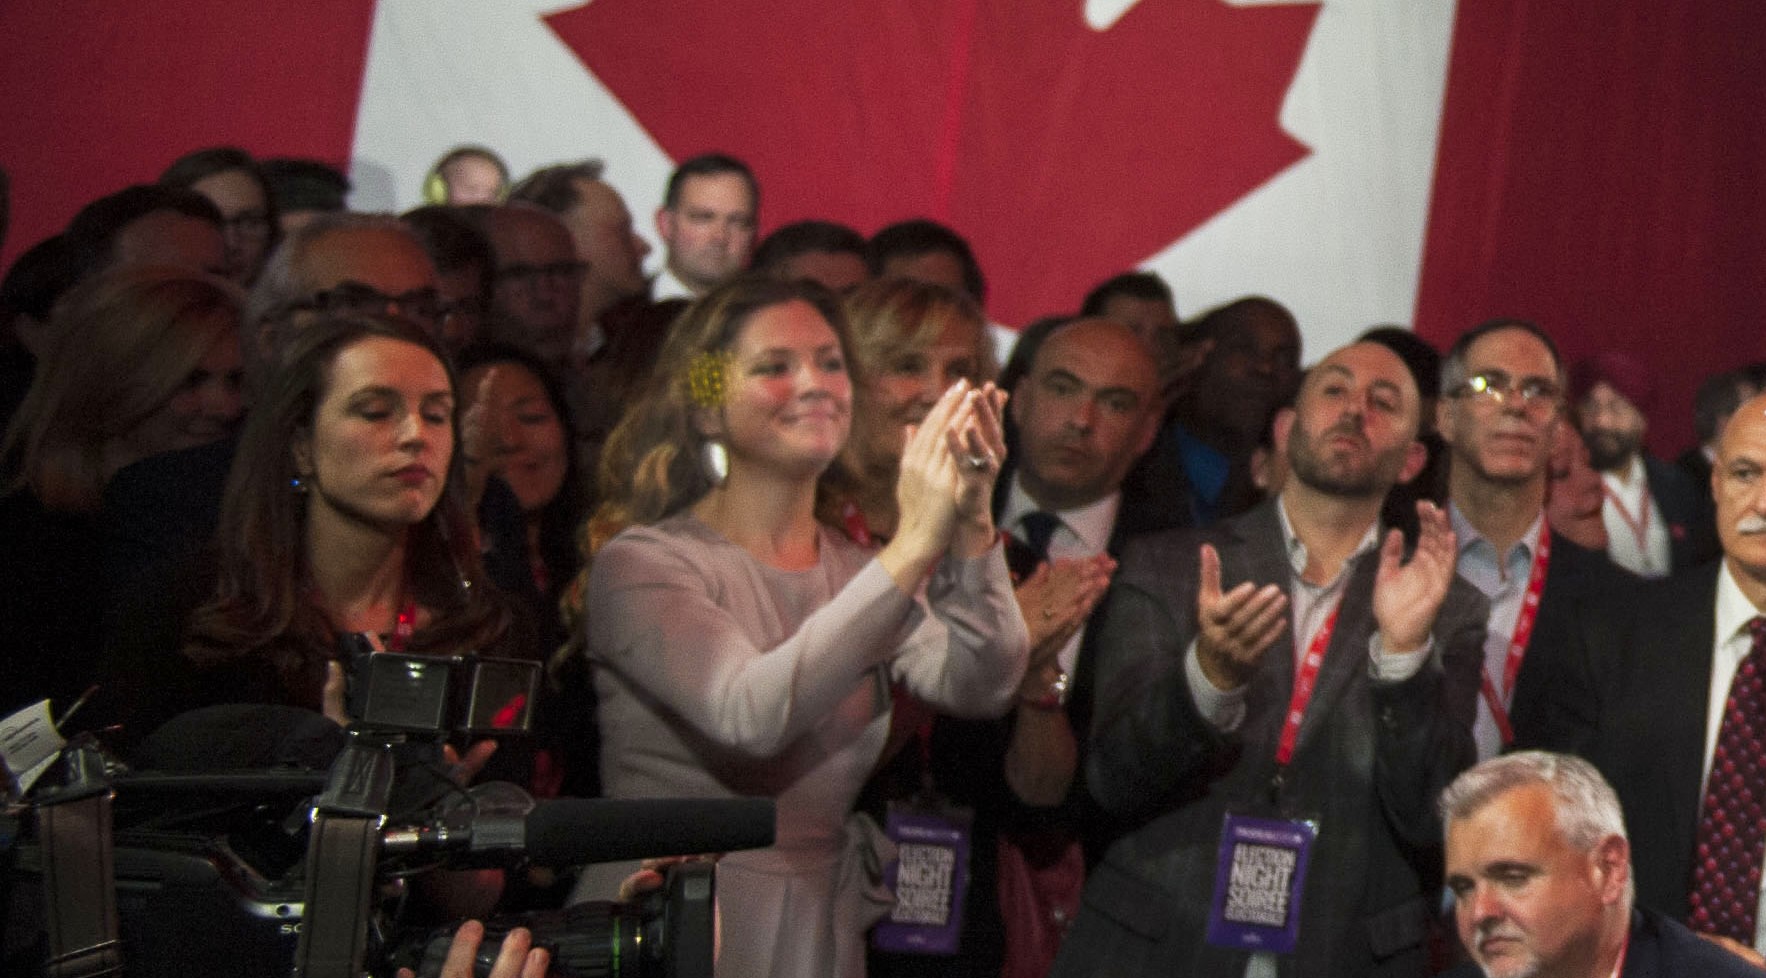 Sophie Grégoire-Trudeau watches her husband, Justin Trudeau, deliver his acceptance speech as Prime Minister Elect. Andrej Ivanov, Photo Editor at The Concordian (CUP).